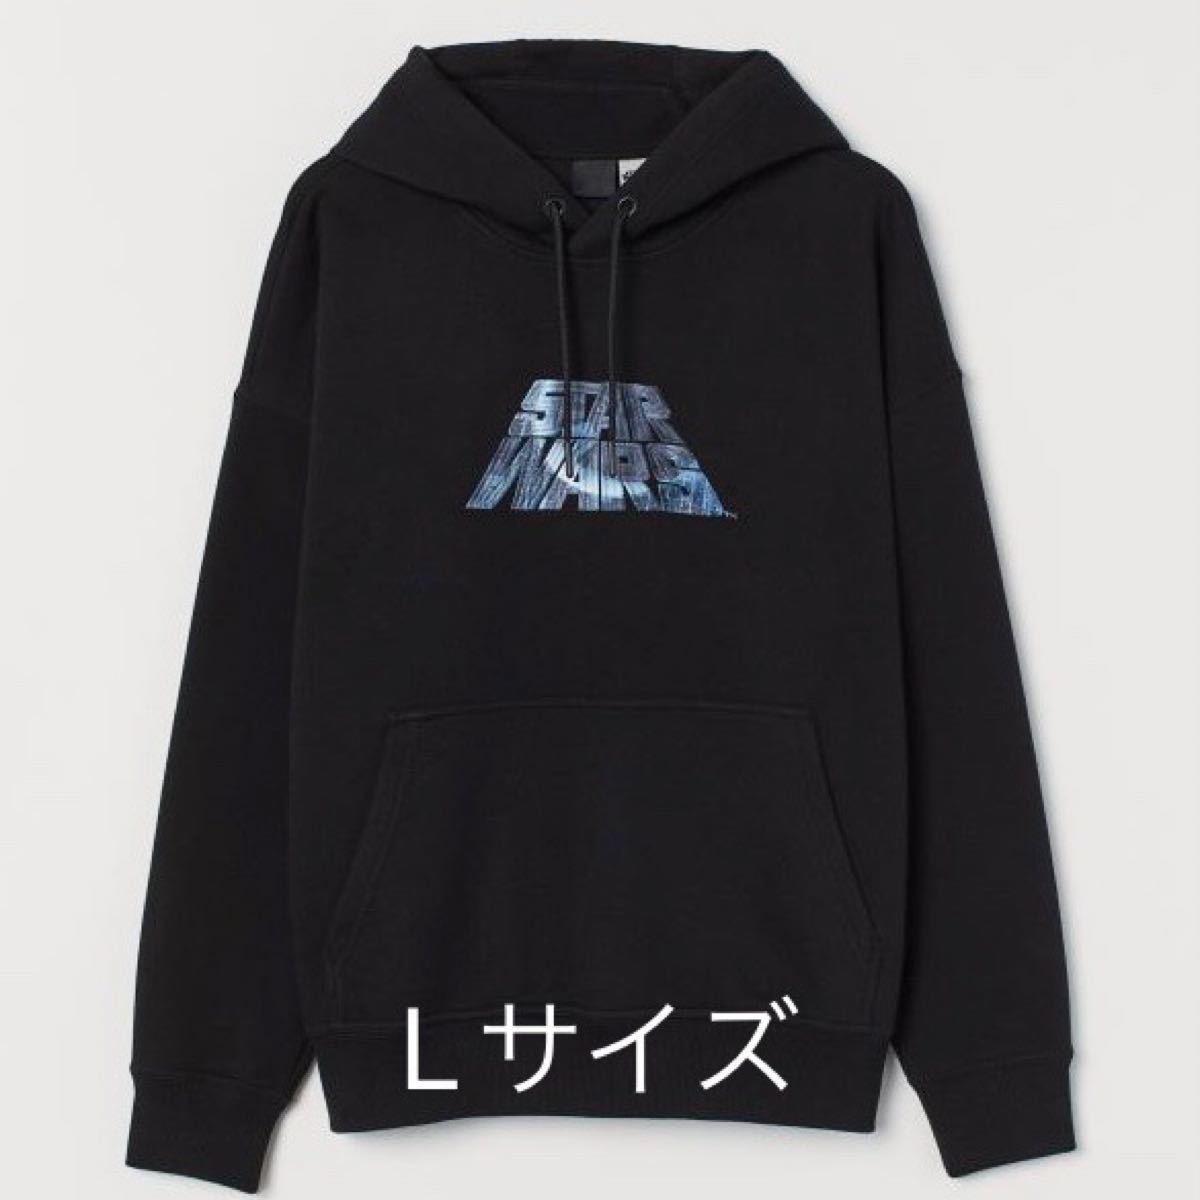 PayPayフリマ｜新品未使用 Lサイズ STAR WARS Kith Solo And Chewie 